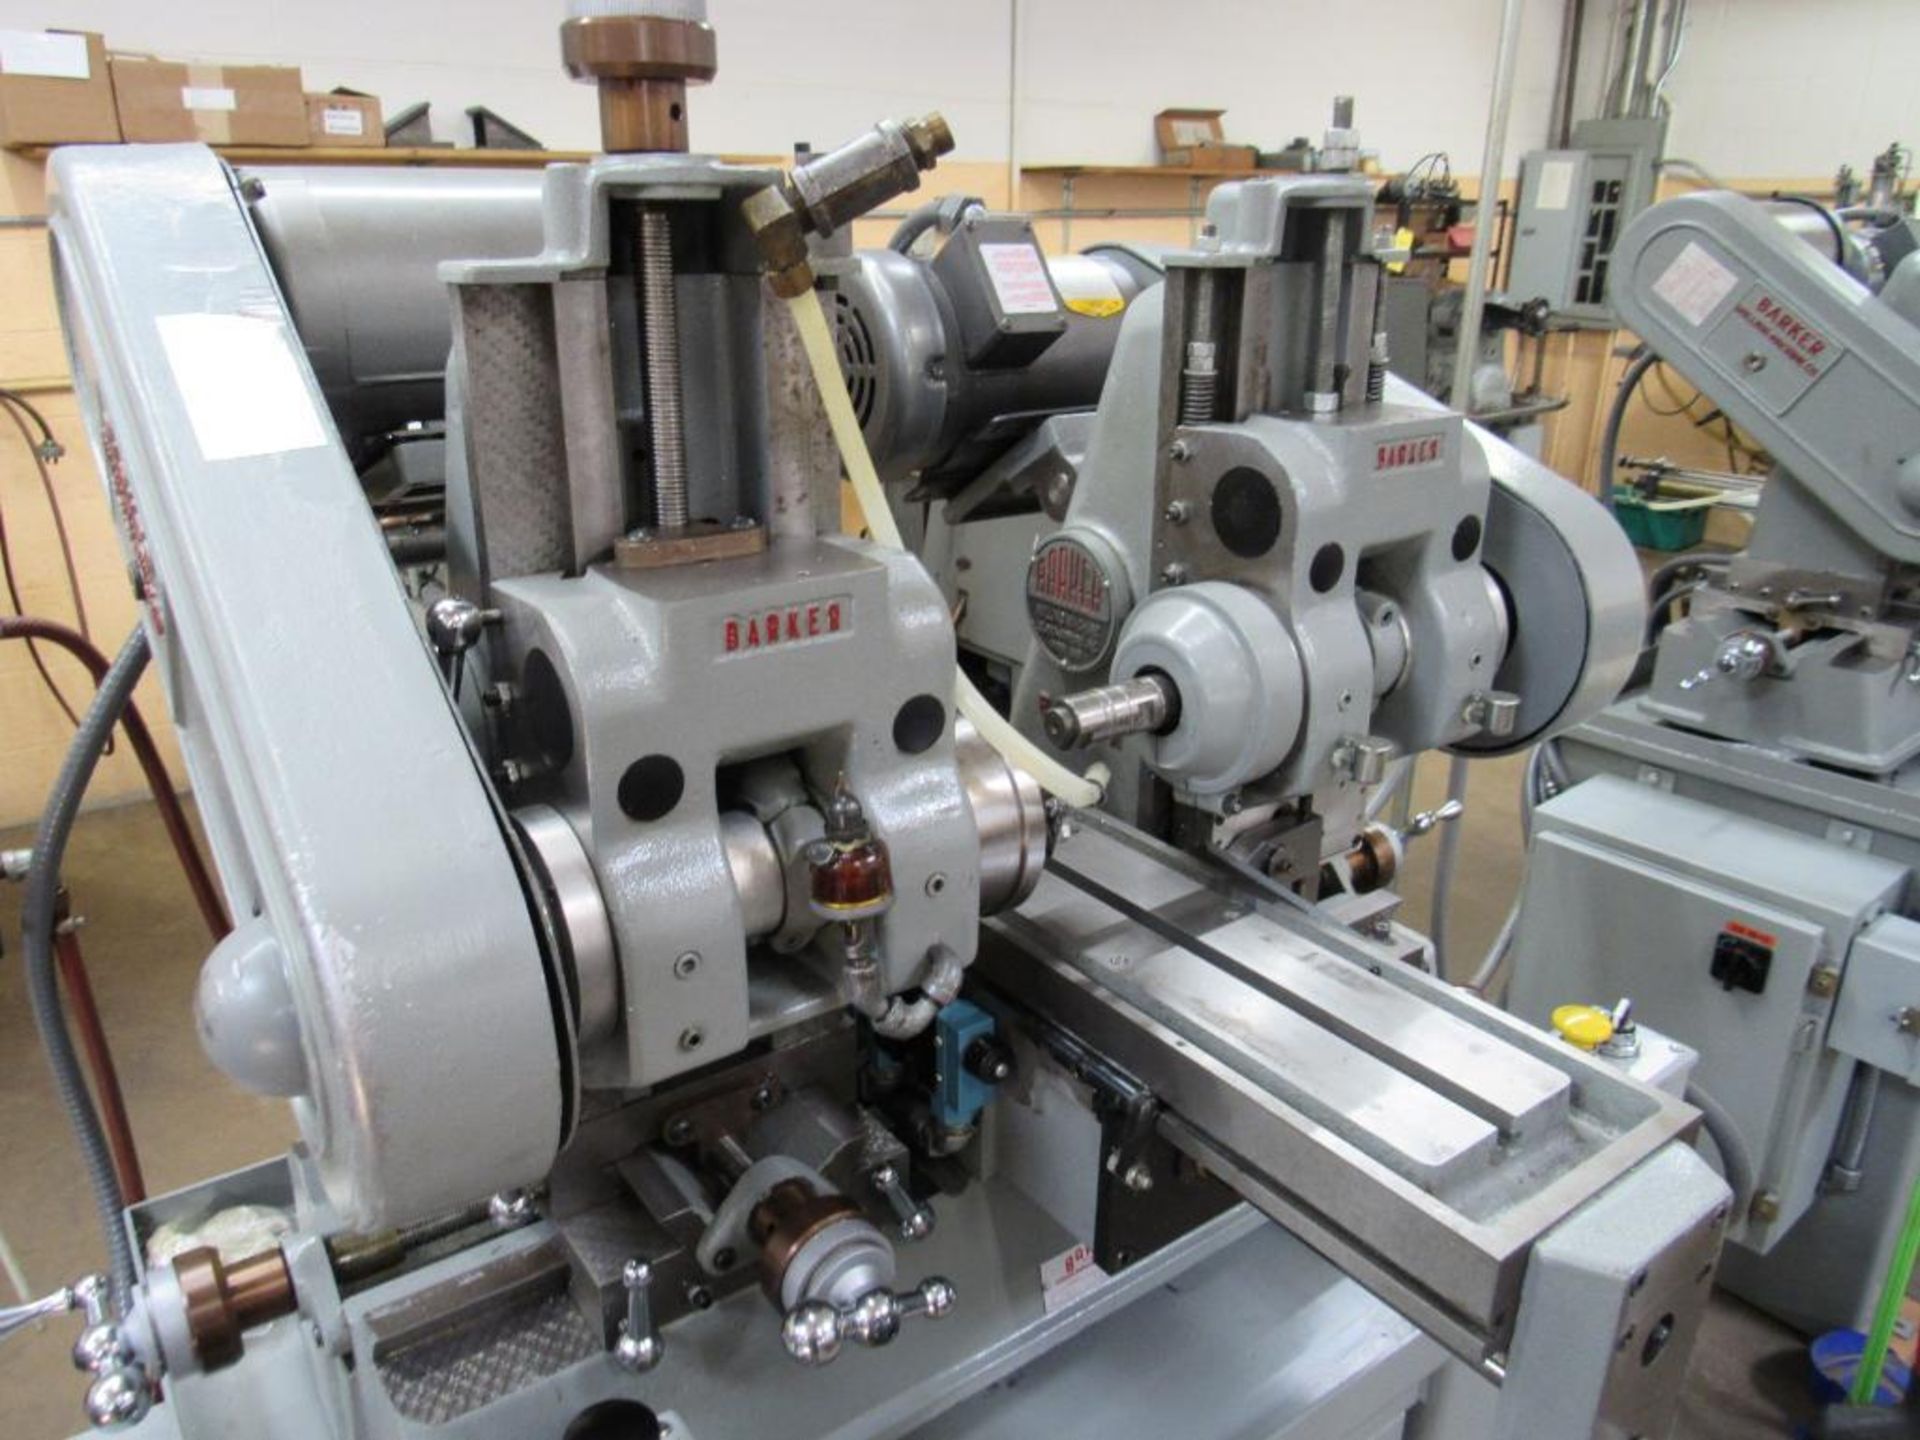 Barker 2-Spindle Horizontal Production Mill Model AMD2, S/N 1662LG, 6 in. x 20 in. Pneumatic Feed Wo - Image 2 of 4